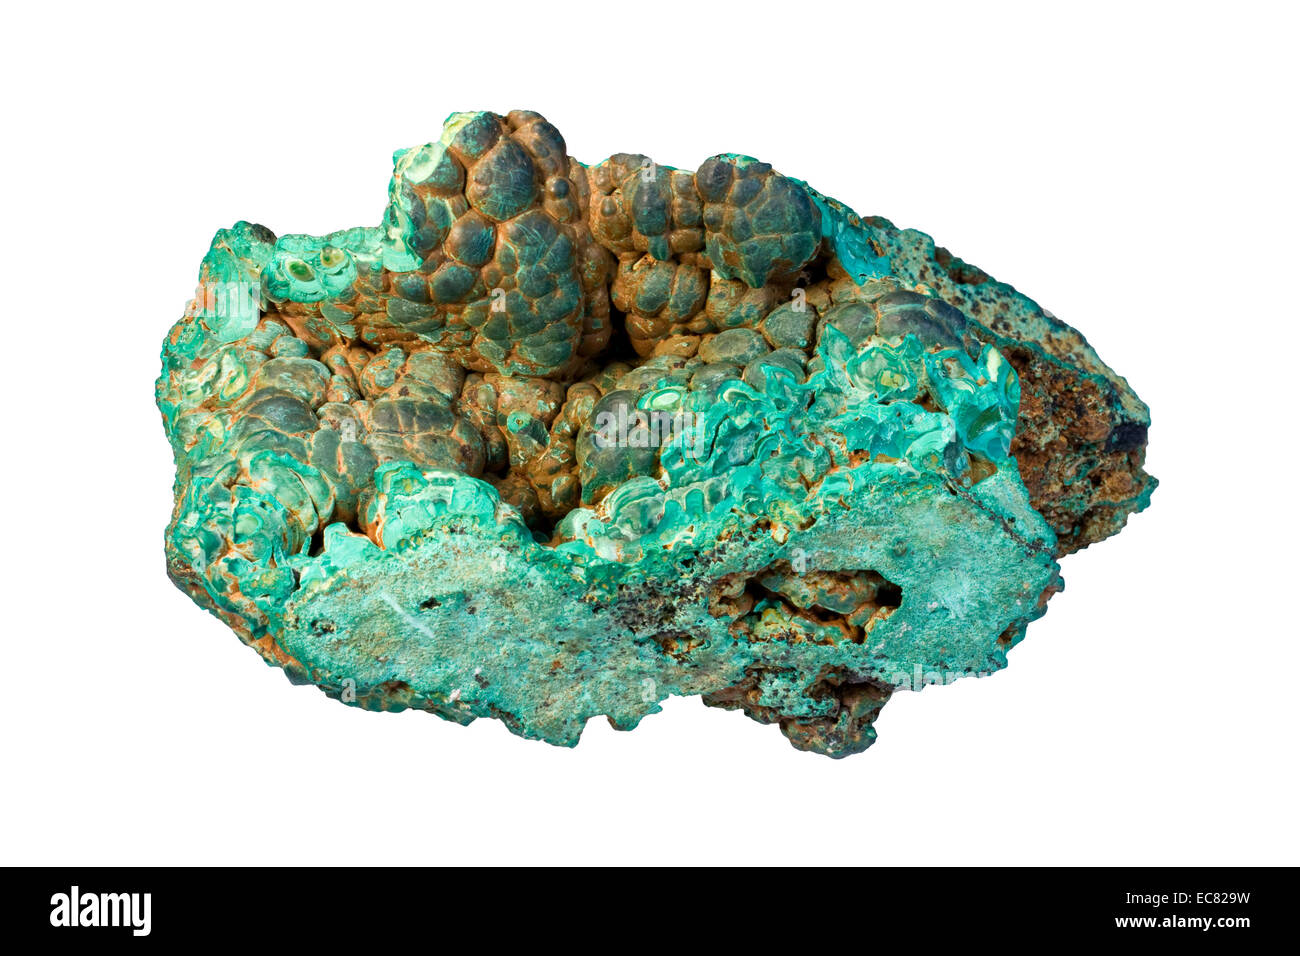 Sample of malachite (hydrated copper carbonate) with brown limonite (mixture of iron-bearing minerals). Stock Photo